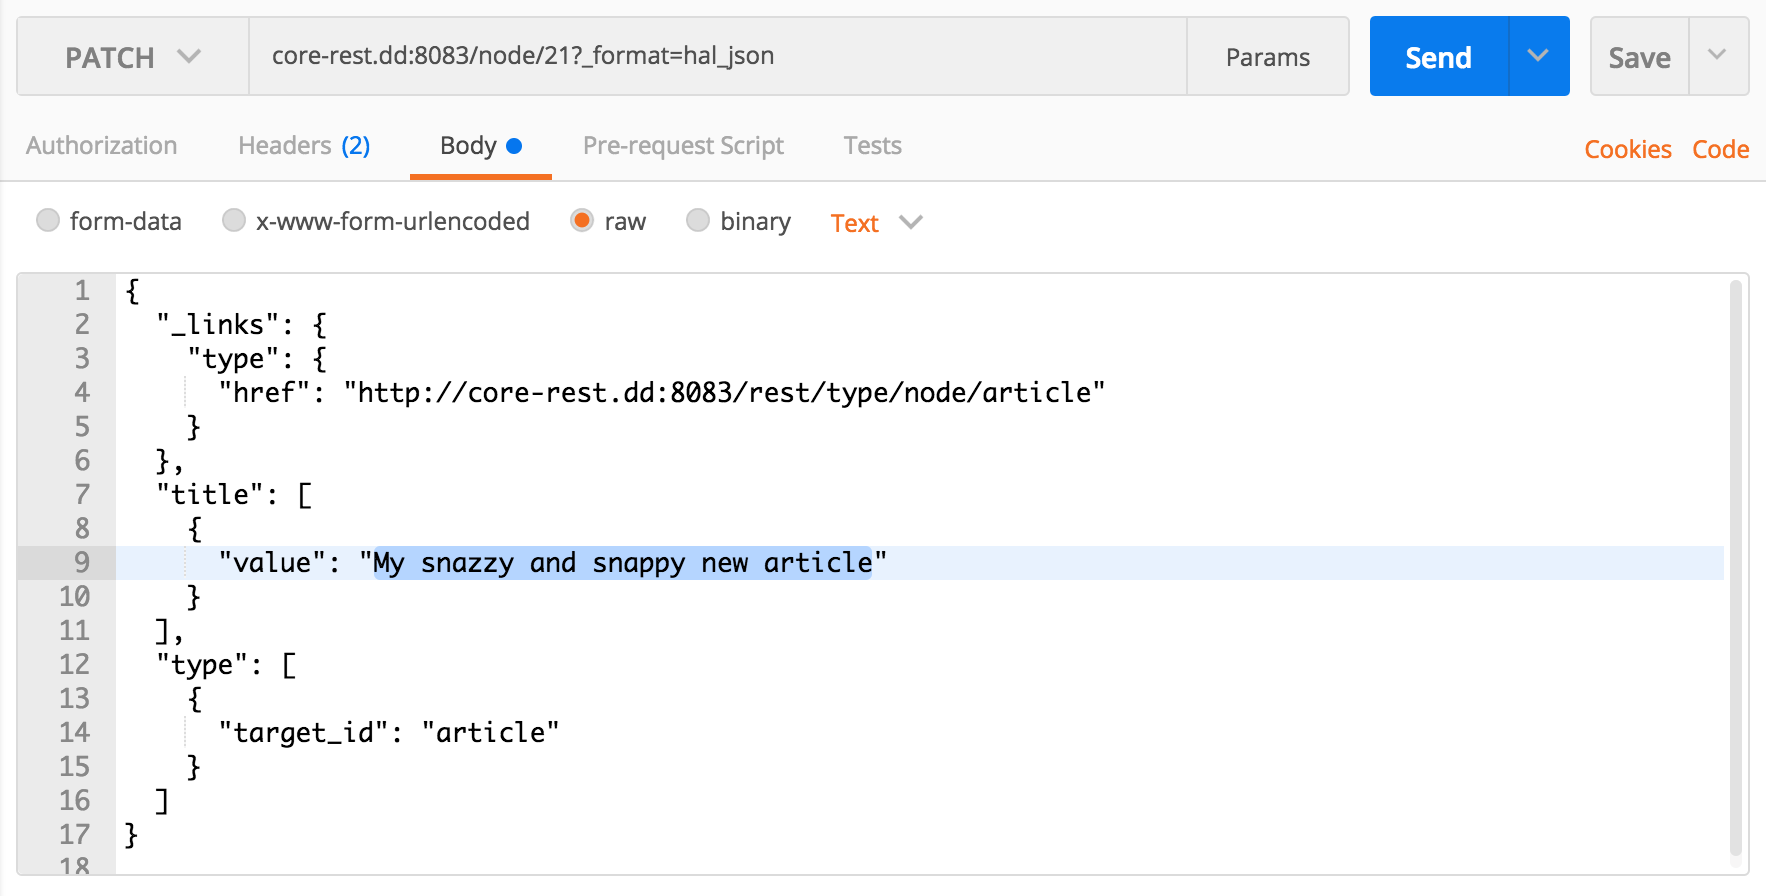 Issuing a PATCH request with Postman